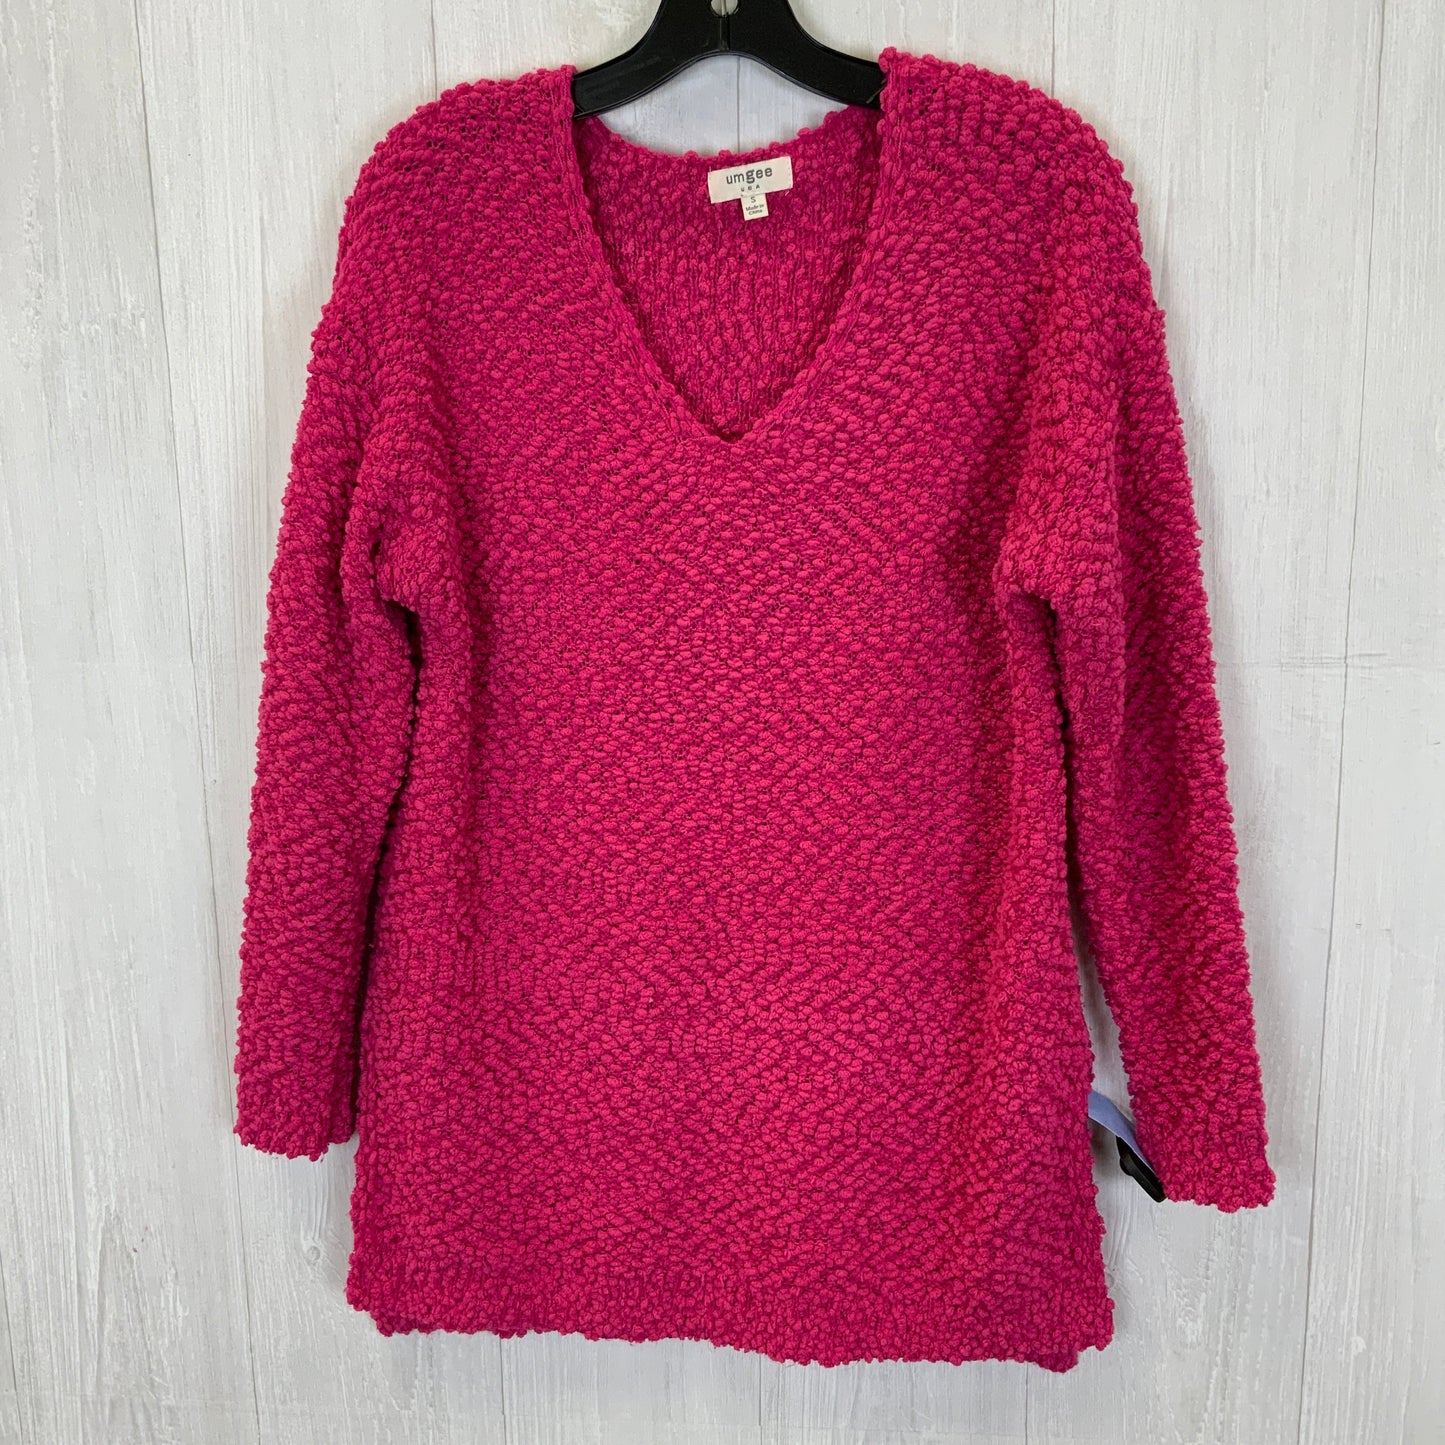 Sweater By Umgee  Size: S